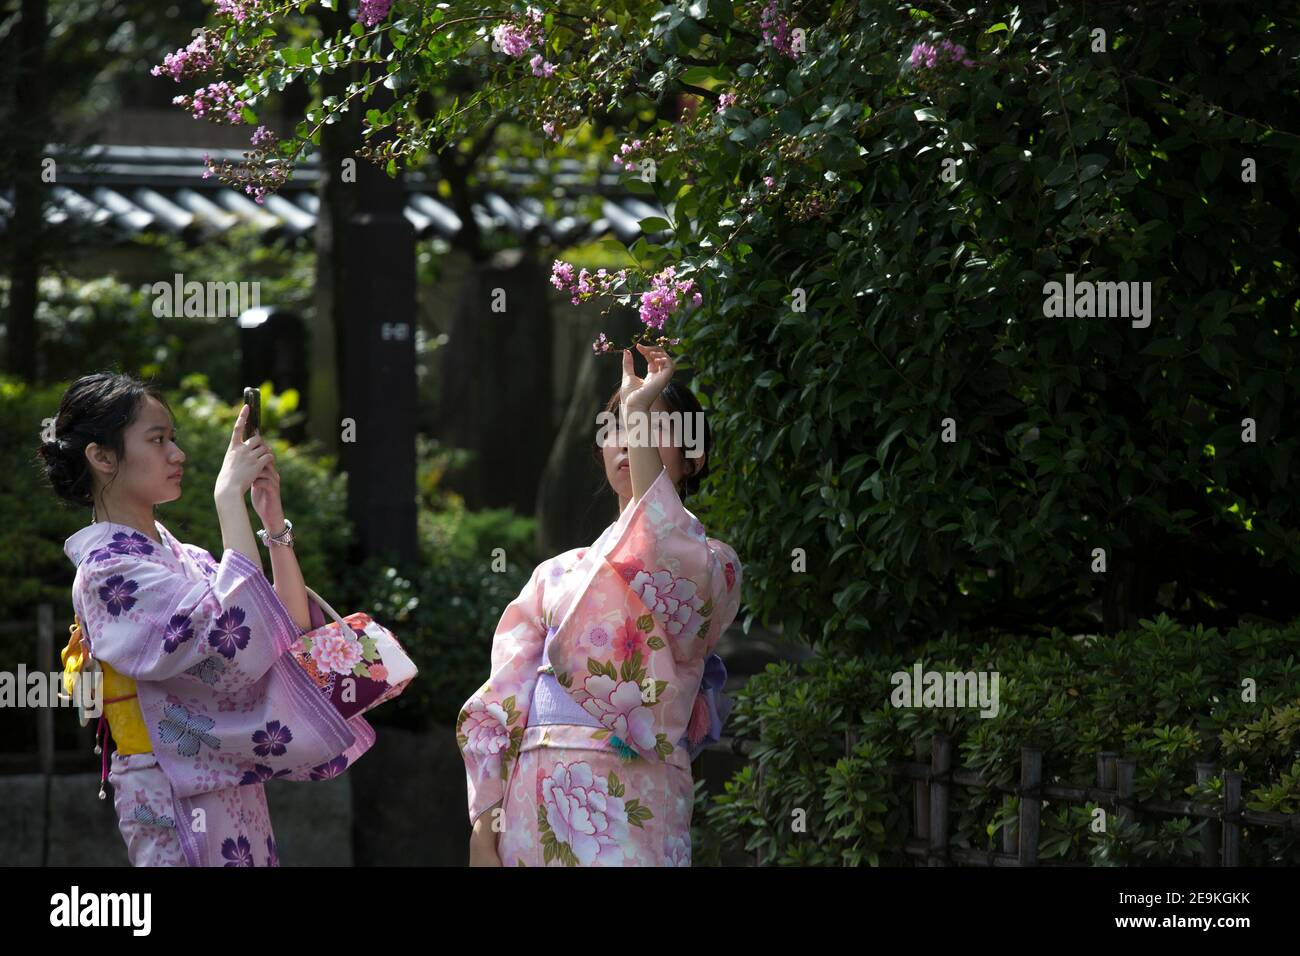 Japanese tourists in Tokyo with traditional japanese dress. Stock Photo